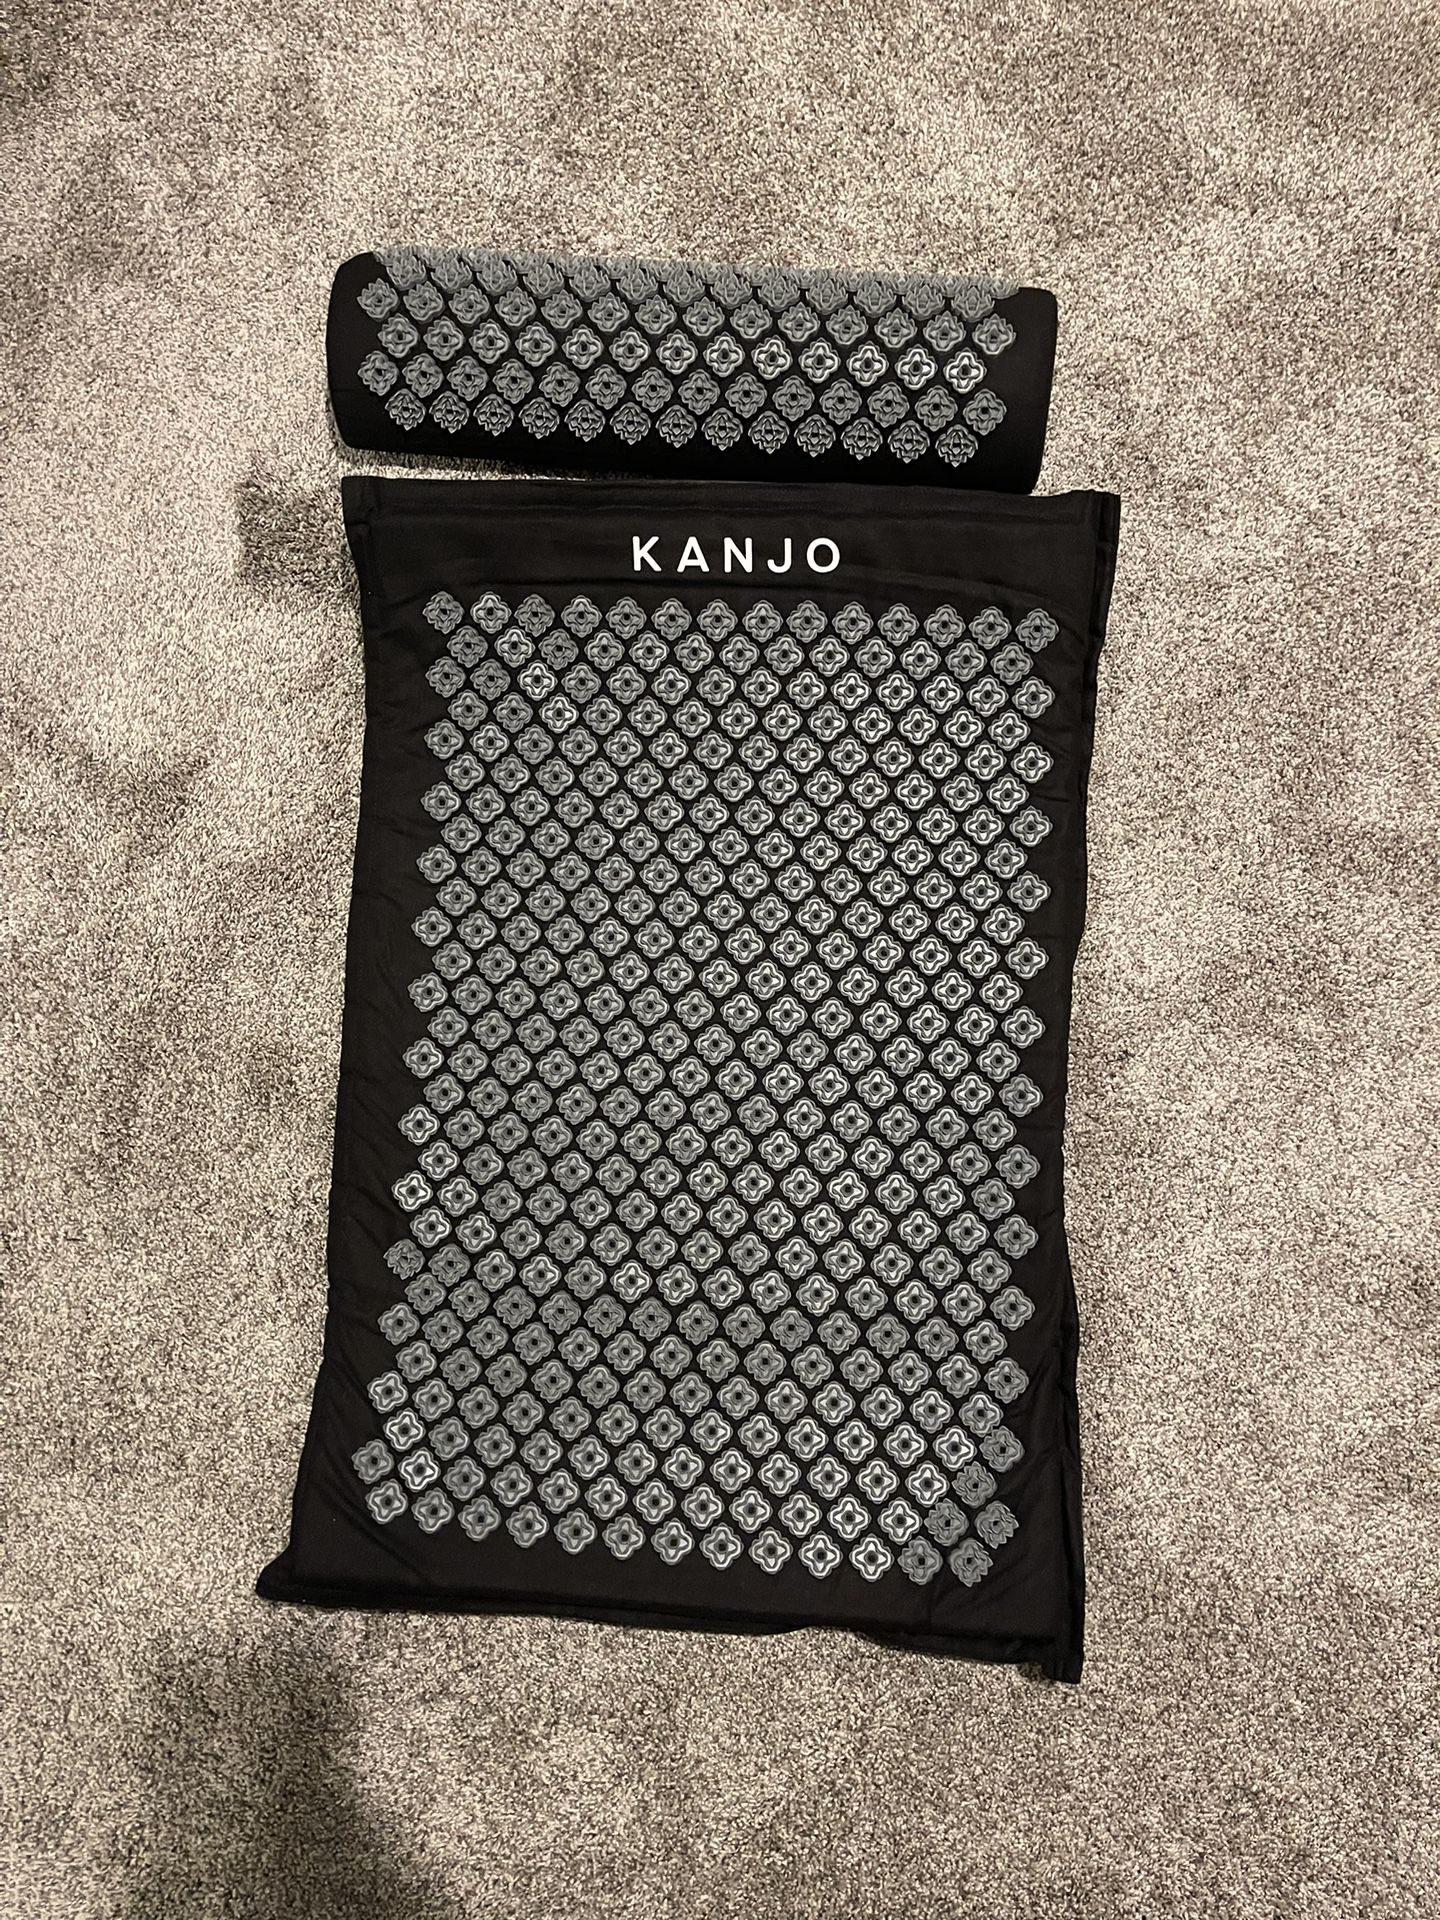 Kanjo Acupressure Mat And Pillow set For Sale